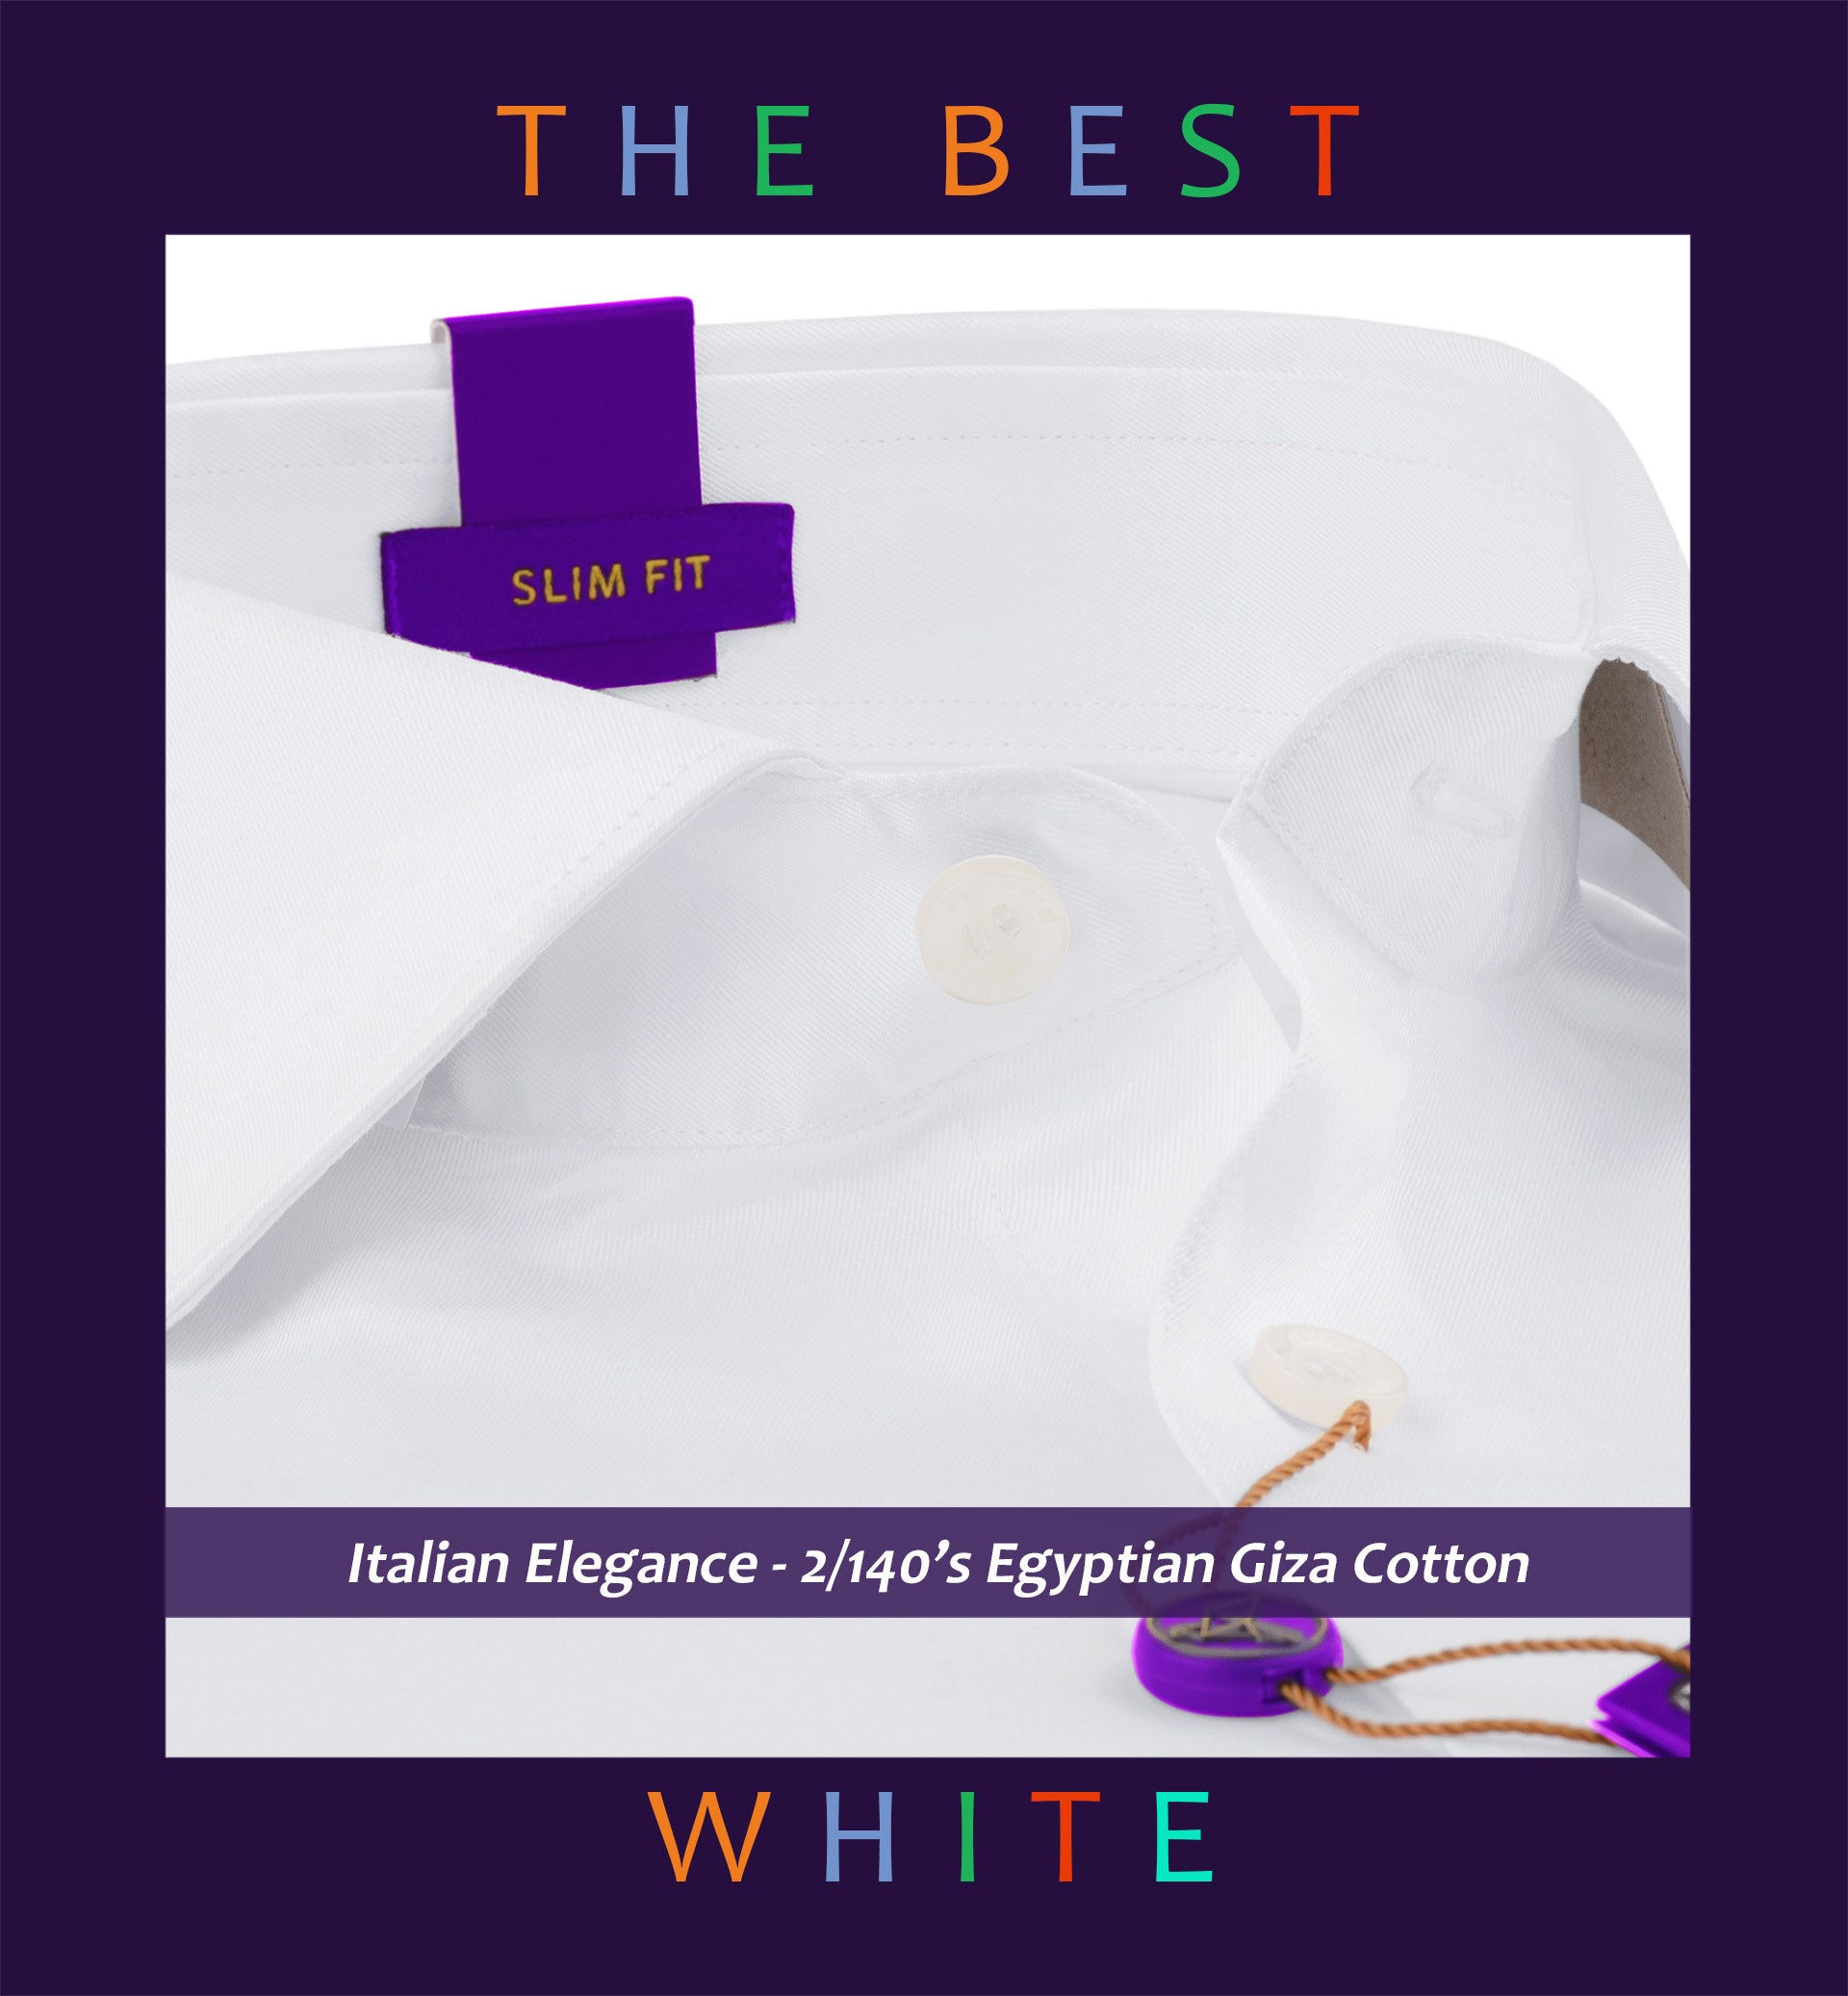 Seattle- The Best Formal White- 2/140 Egyptian Giza Cotton